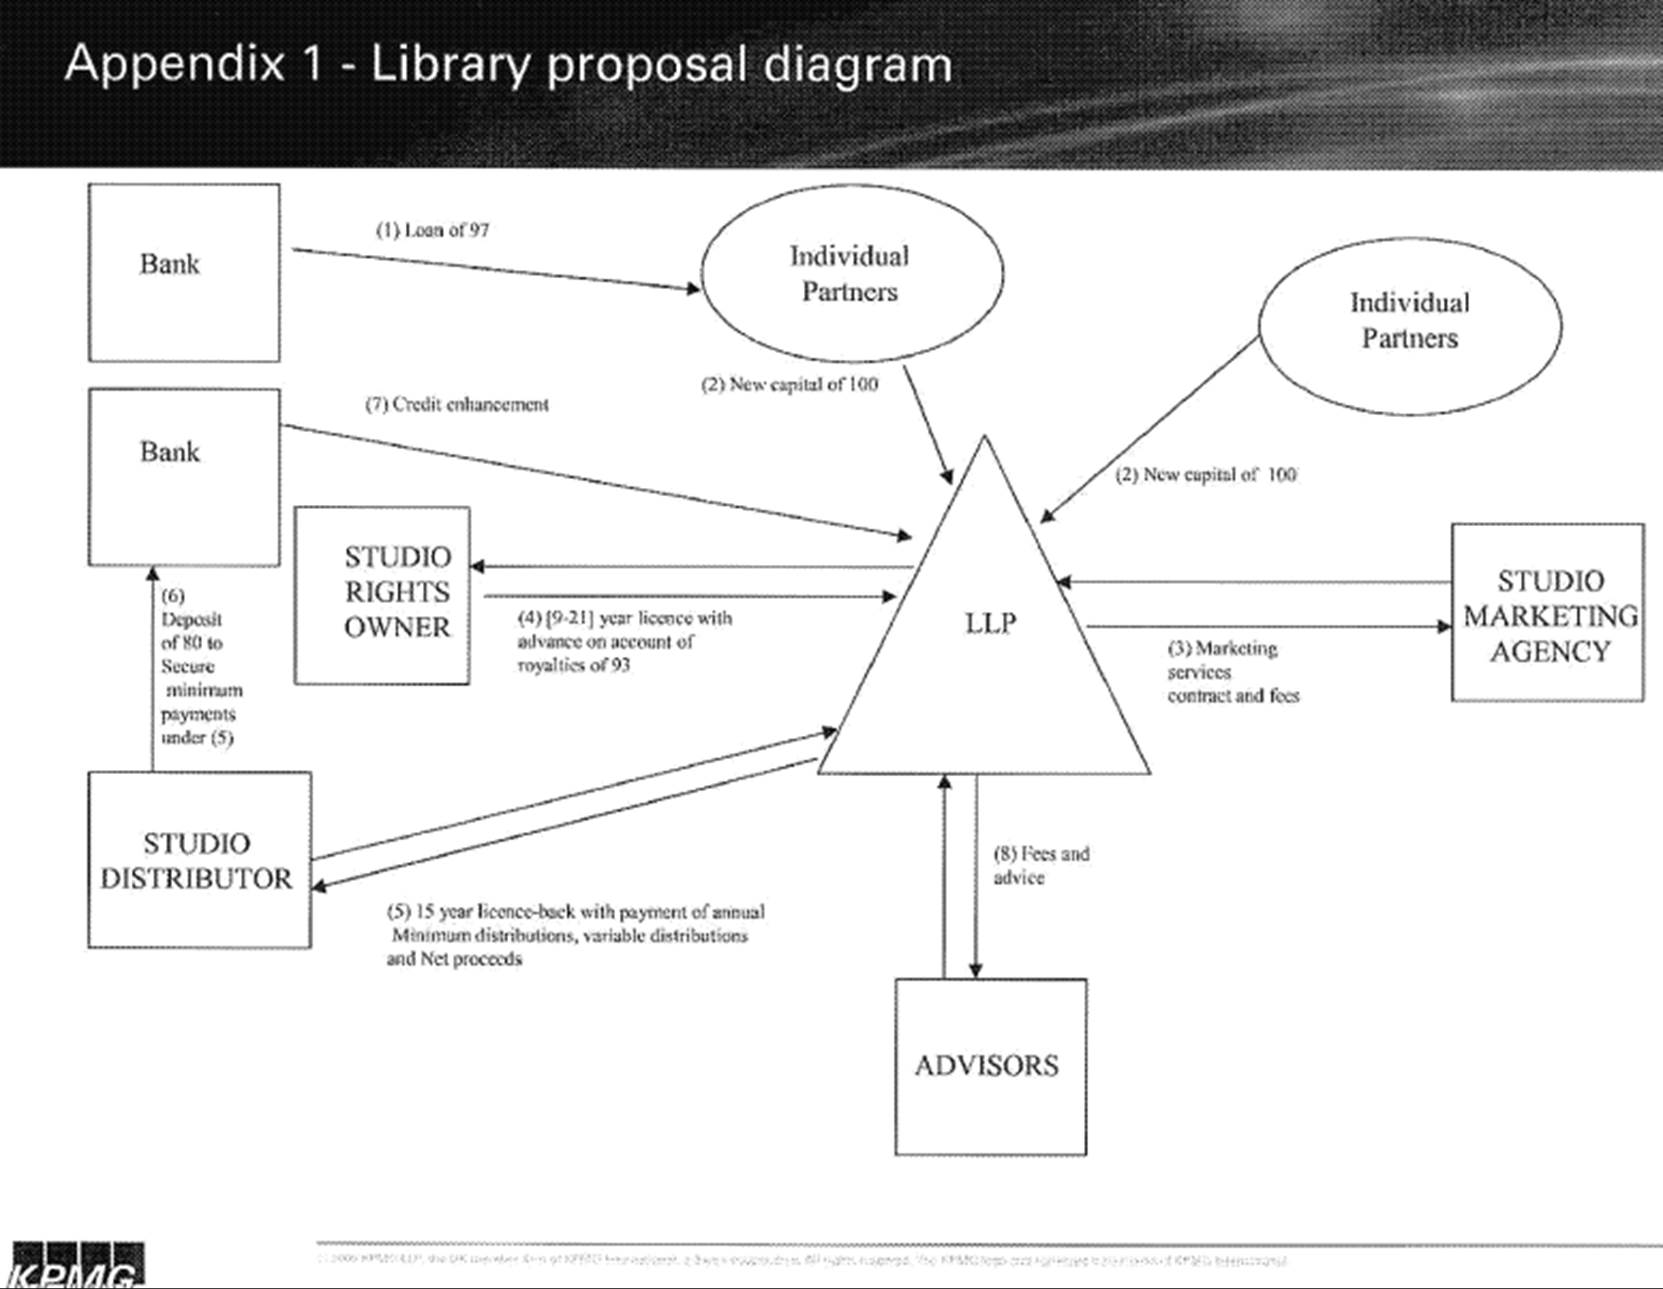 A diagram of a library proposal

Description automatically generated